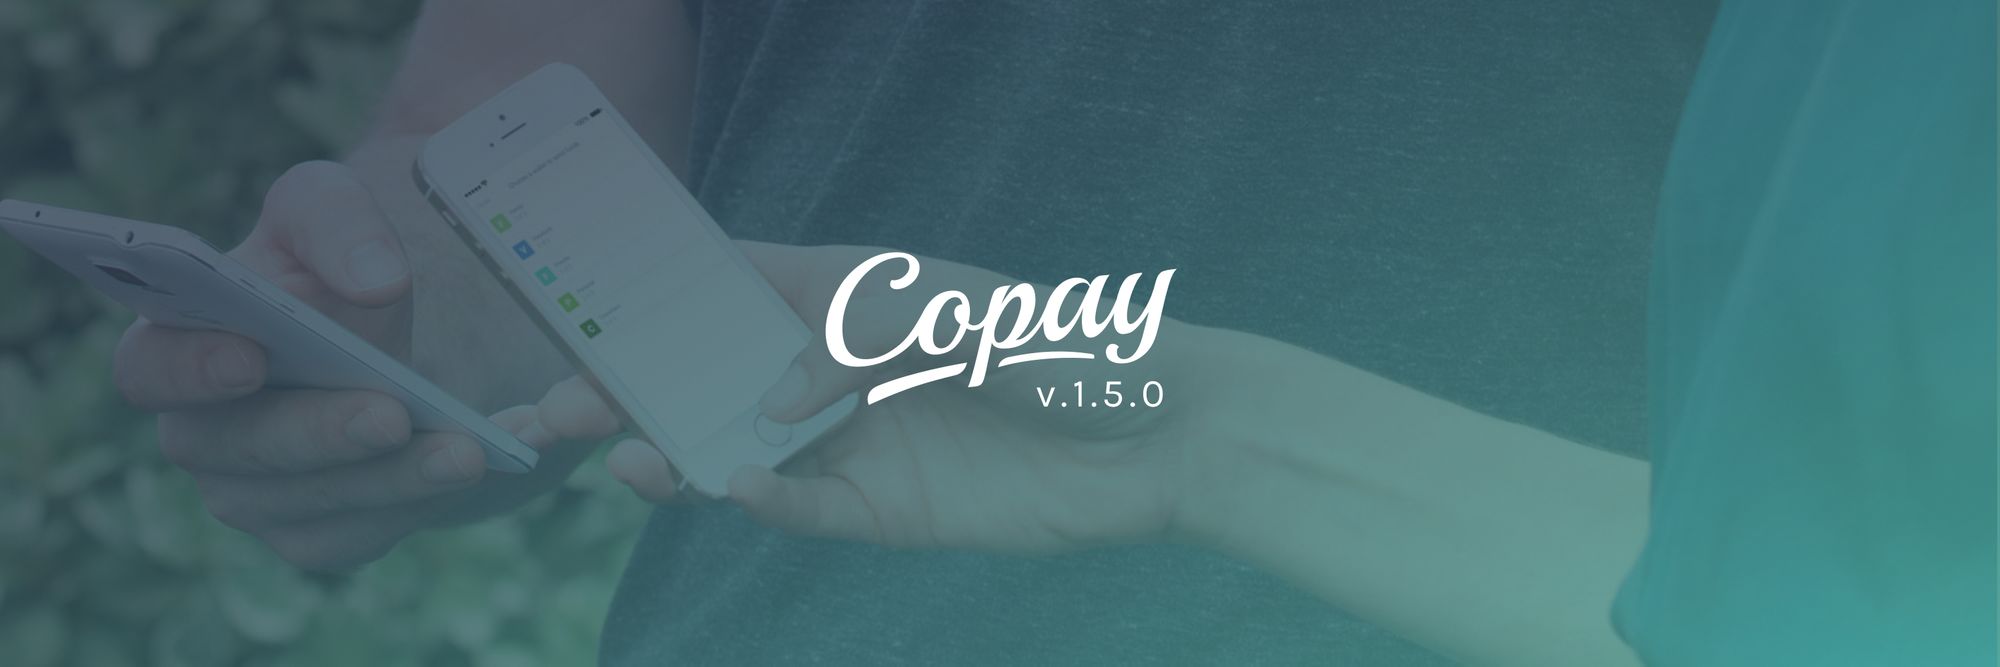 Copay's Chrome App Adds TREZOR Hardware Wallet Support